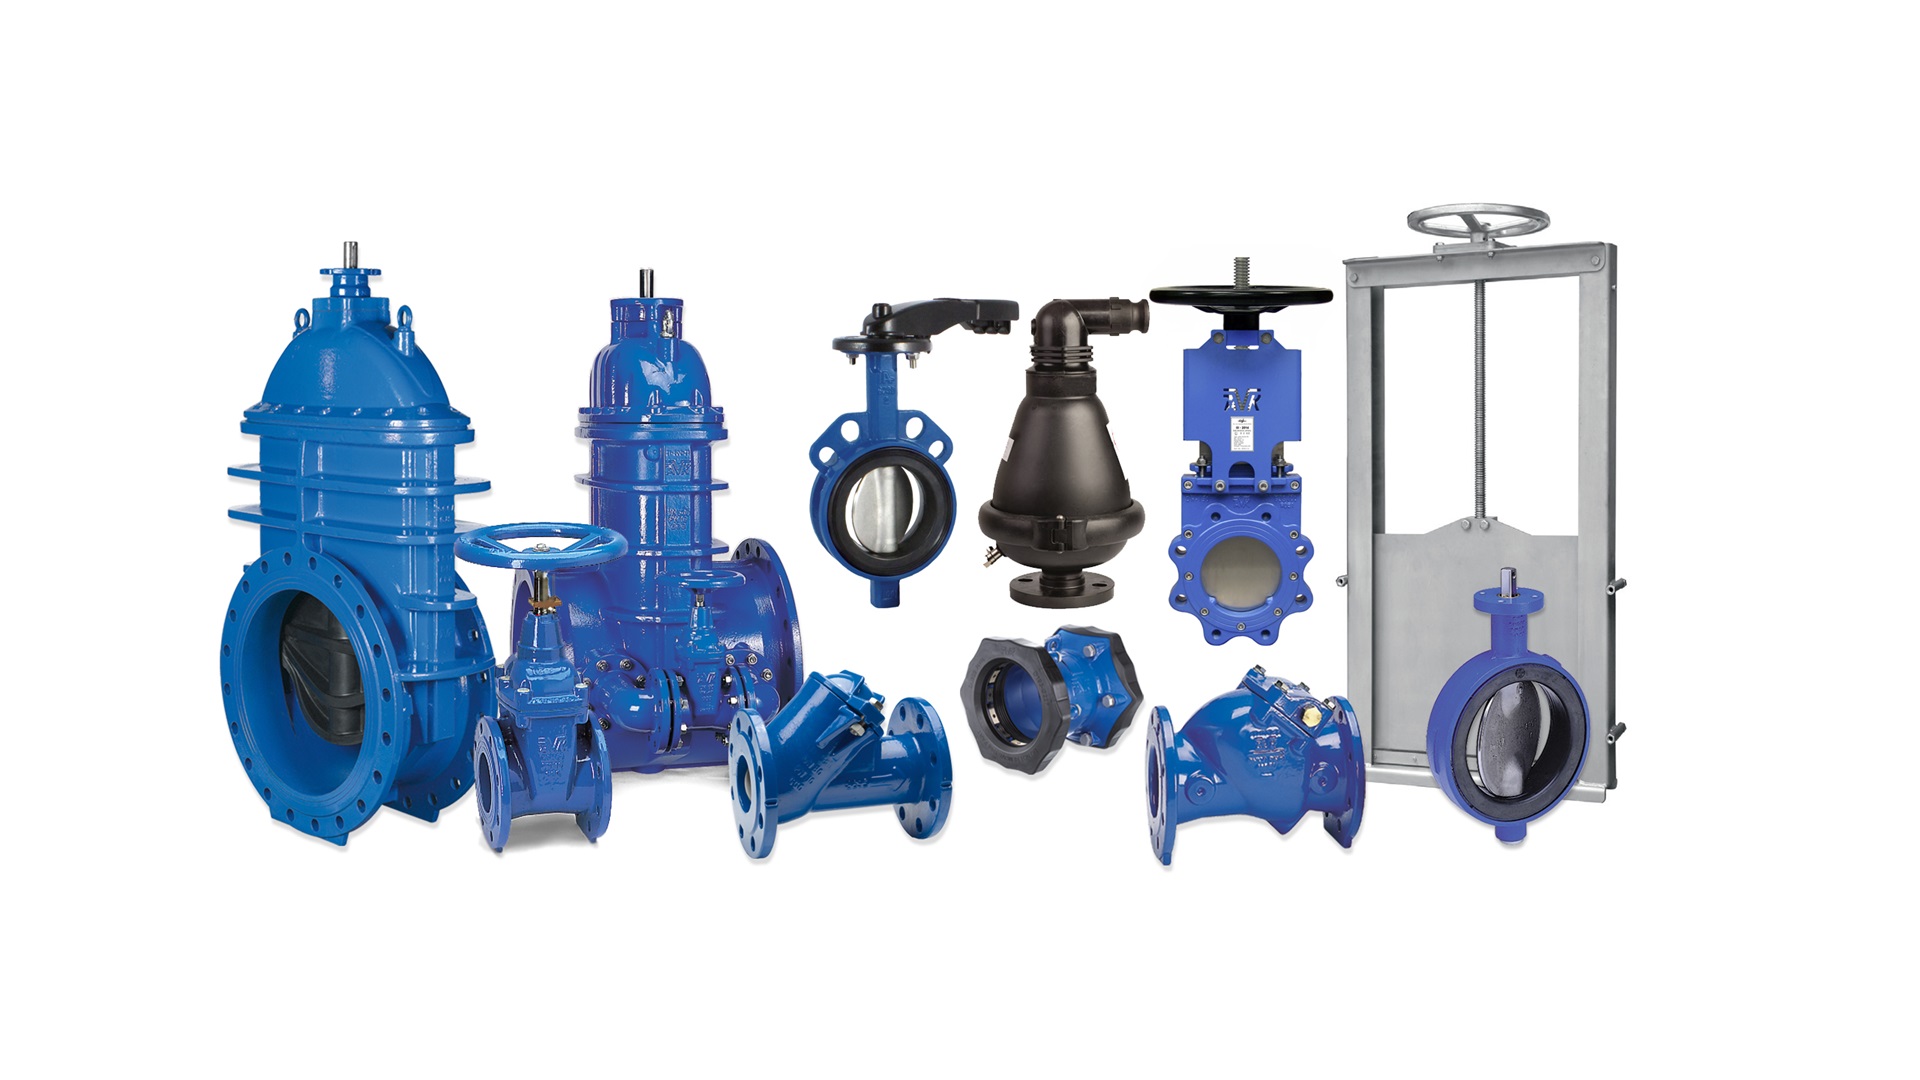 Waste Water, Hight Quality, AVK, Valves, Solutions, QUALITY, SUSTAINABILITY, Environment, Corporate social responsibility, reuse, DIN, BS, AWWA, AS, JIS,  gate valves, accessories, knife gate valves, ball and swing check valves, butterfly valves, air valves, penstocks